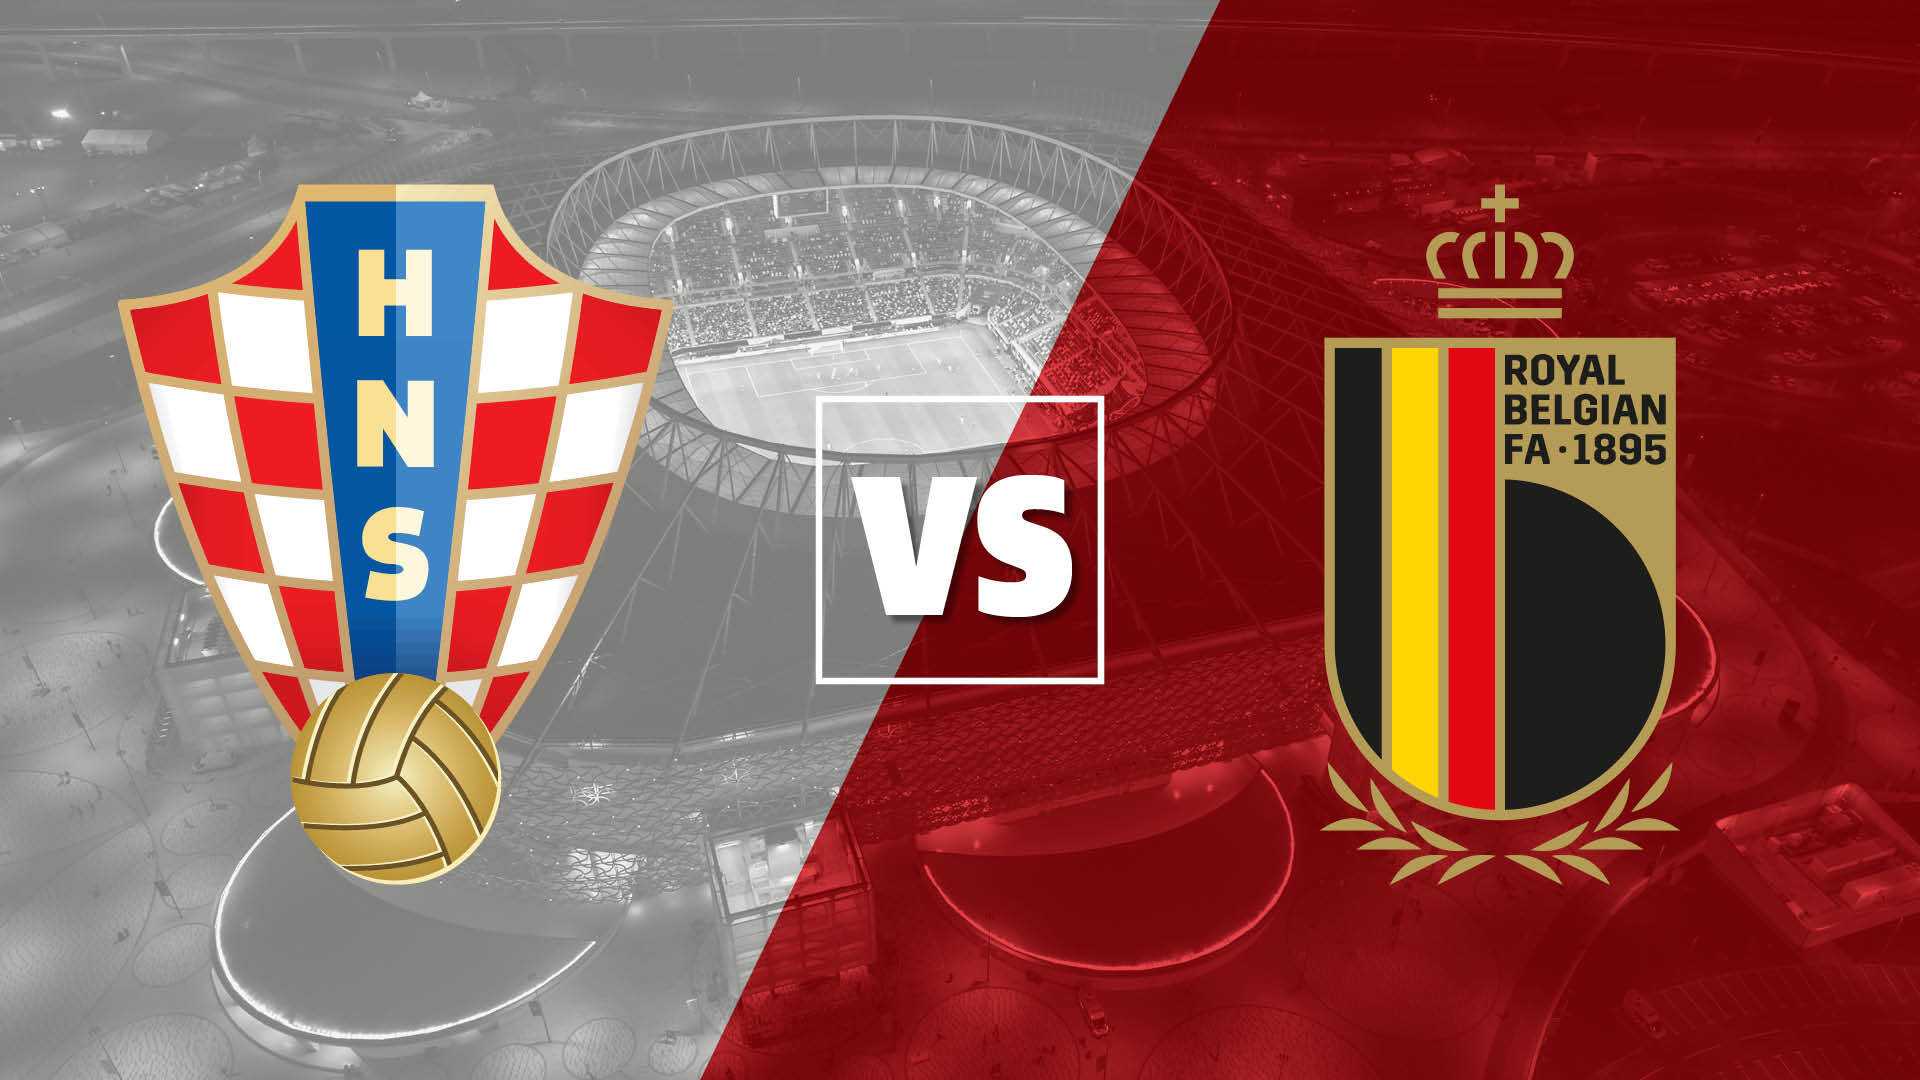 Croatia vs Belgium live stream and how to watch the 2022 FIFA World Cup in 4K HDR